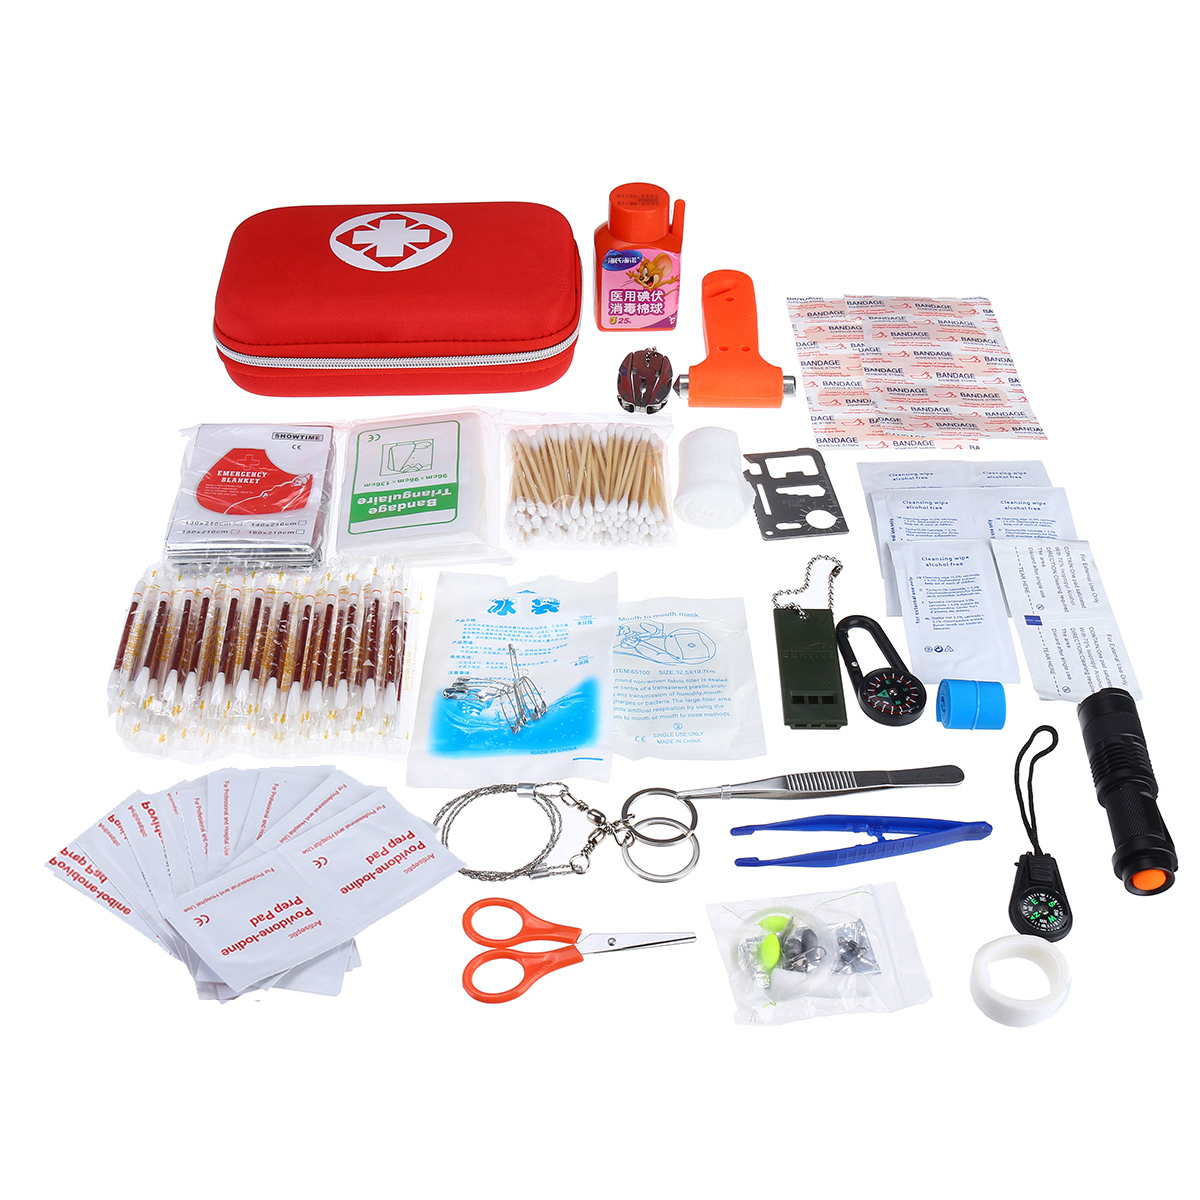 250Pcs-First-Aid-Emergency-SOS-Survival-Kit-Bag-Gear-For-Travel-Camping-Outdoor-Home-1734077-6